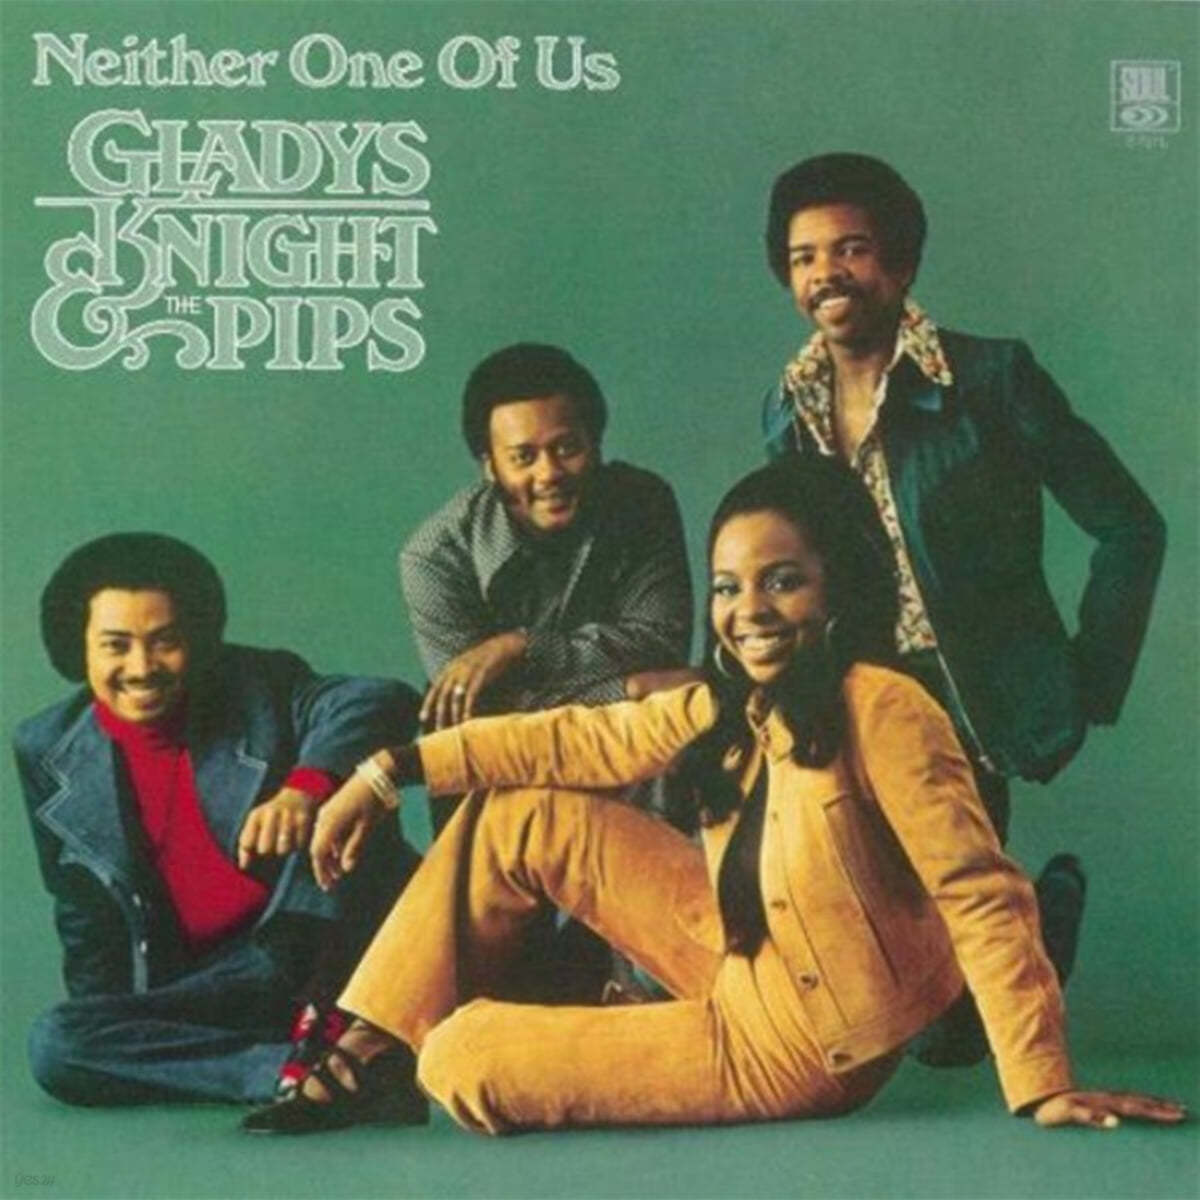 Gladys Knight &amp; The Pips (글래디스 나이트 앤드 더 핍스) - Neither One Of Us 